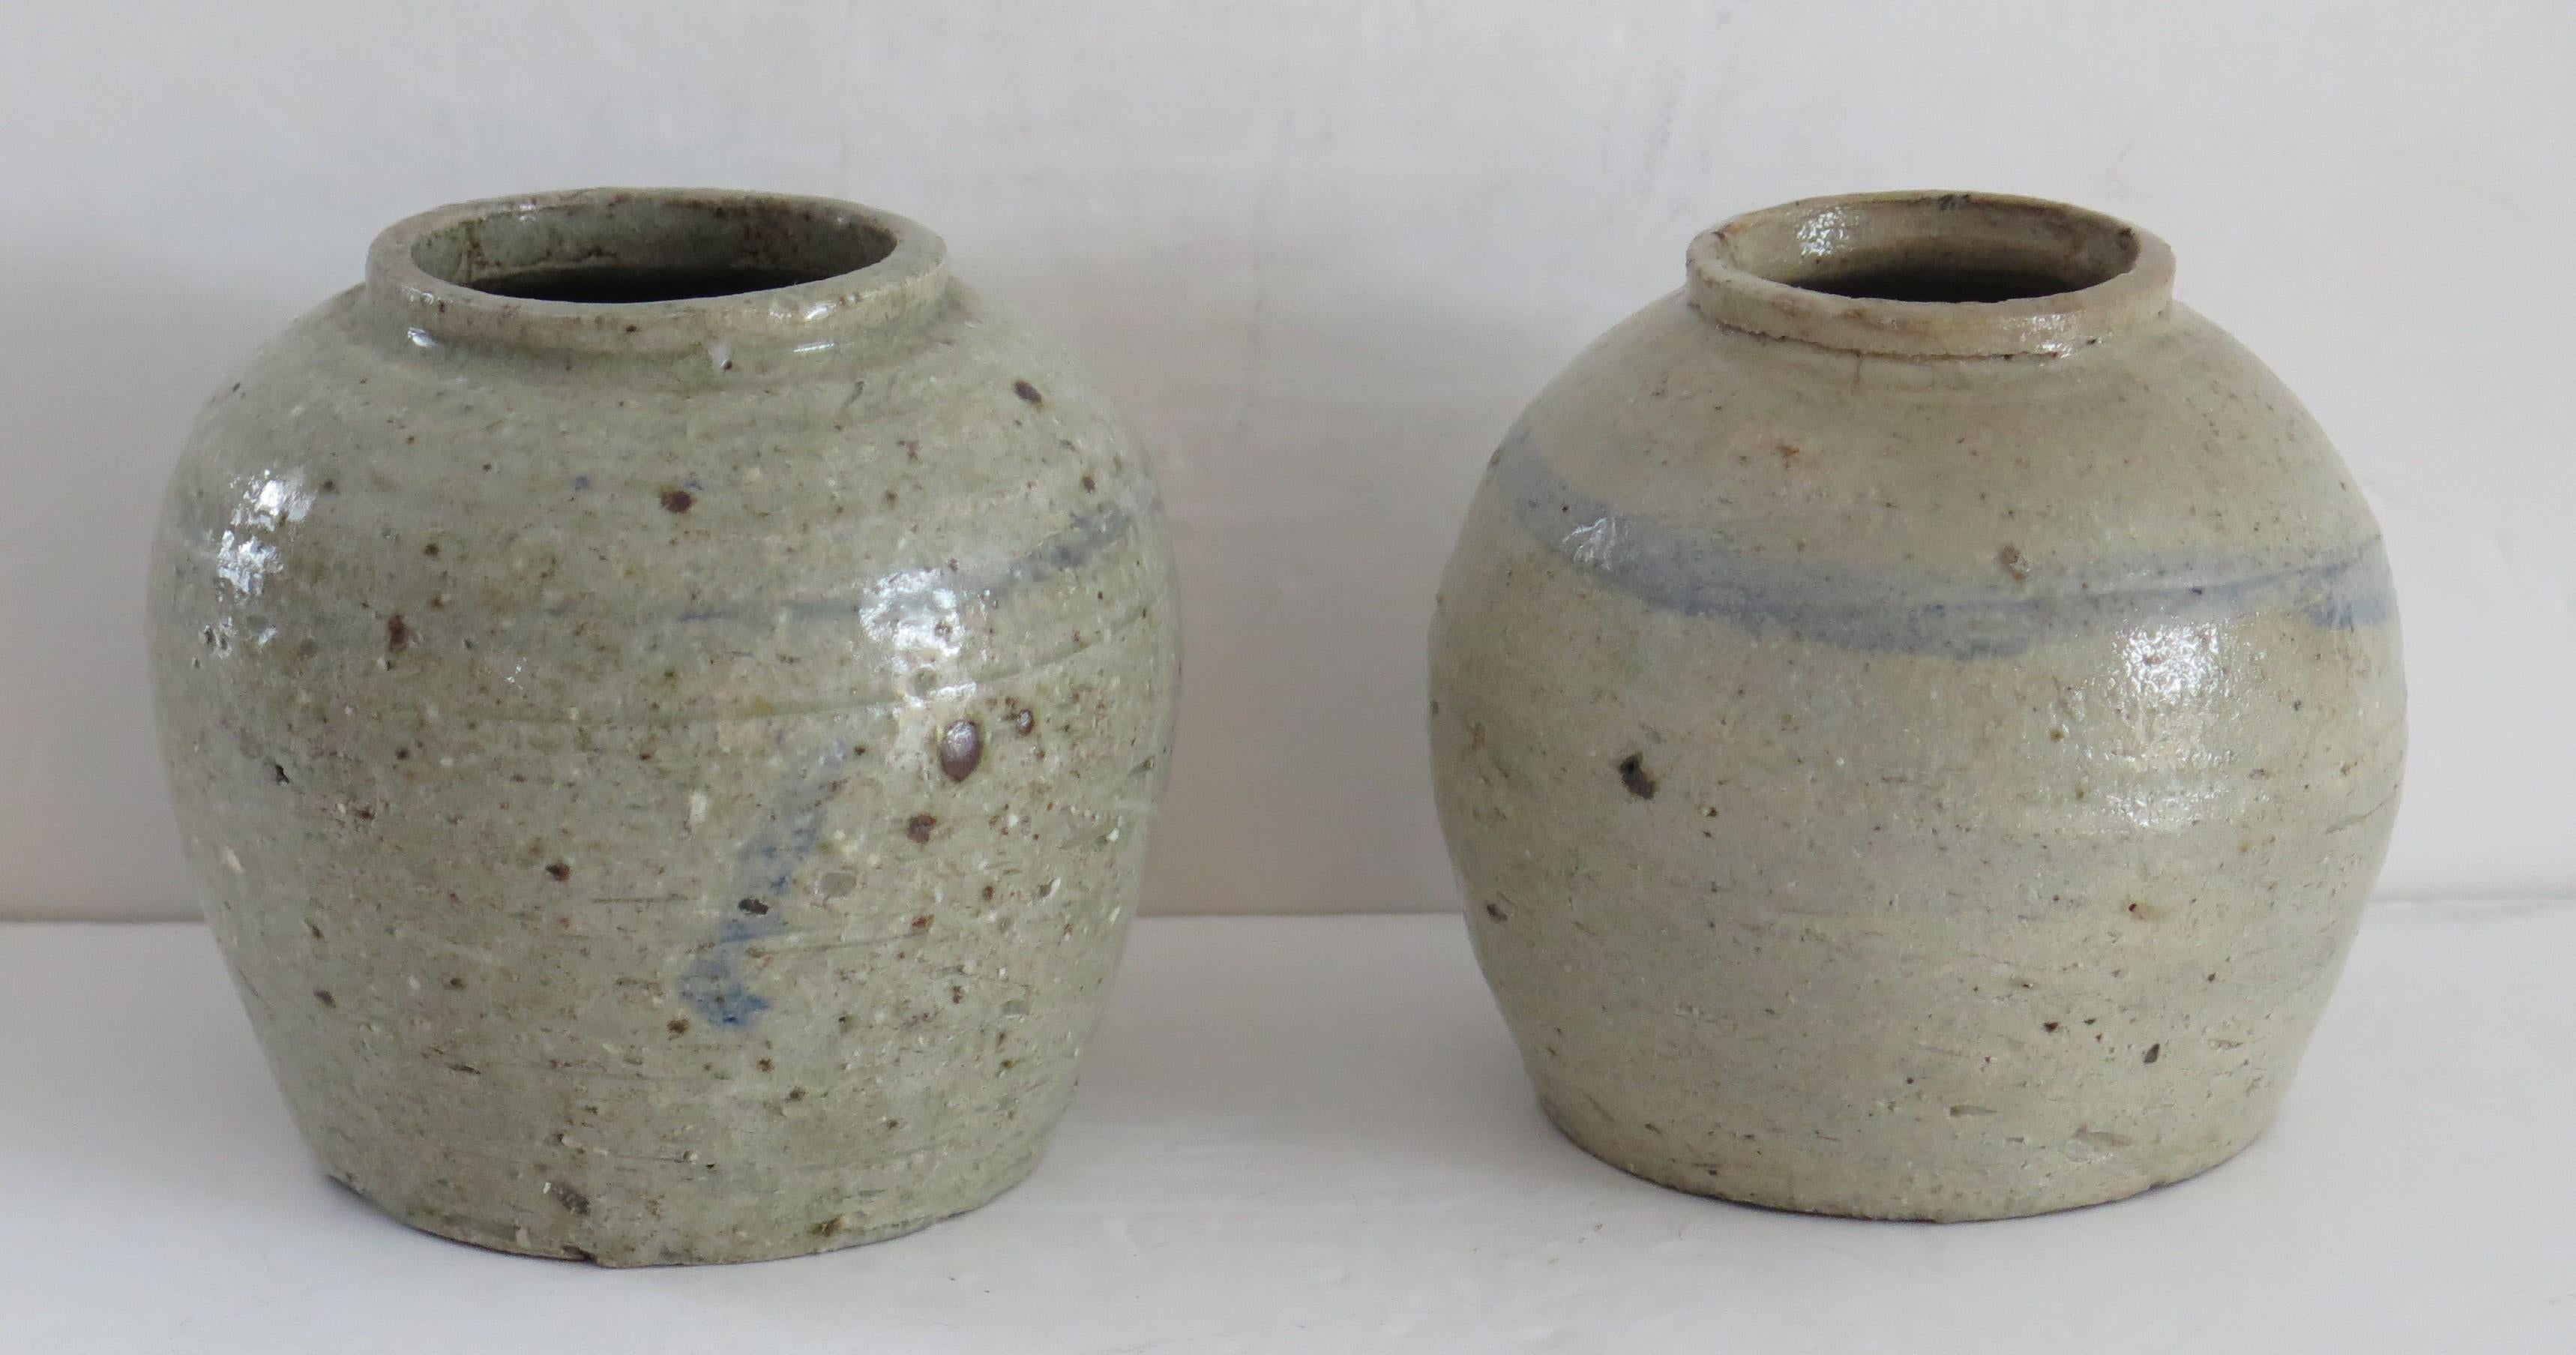 This is two similar Chinese handcrafted ceramic provincial jars with a light celadon glaze which we date to the Ming period of the early 17th century or possibly earlier.

The jars are hand potted with short necks and simply decorated with a ring